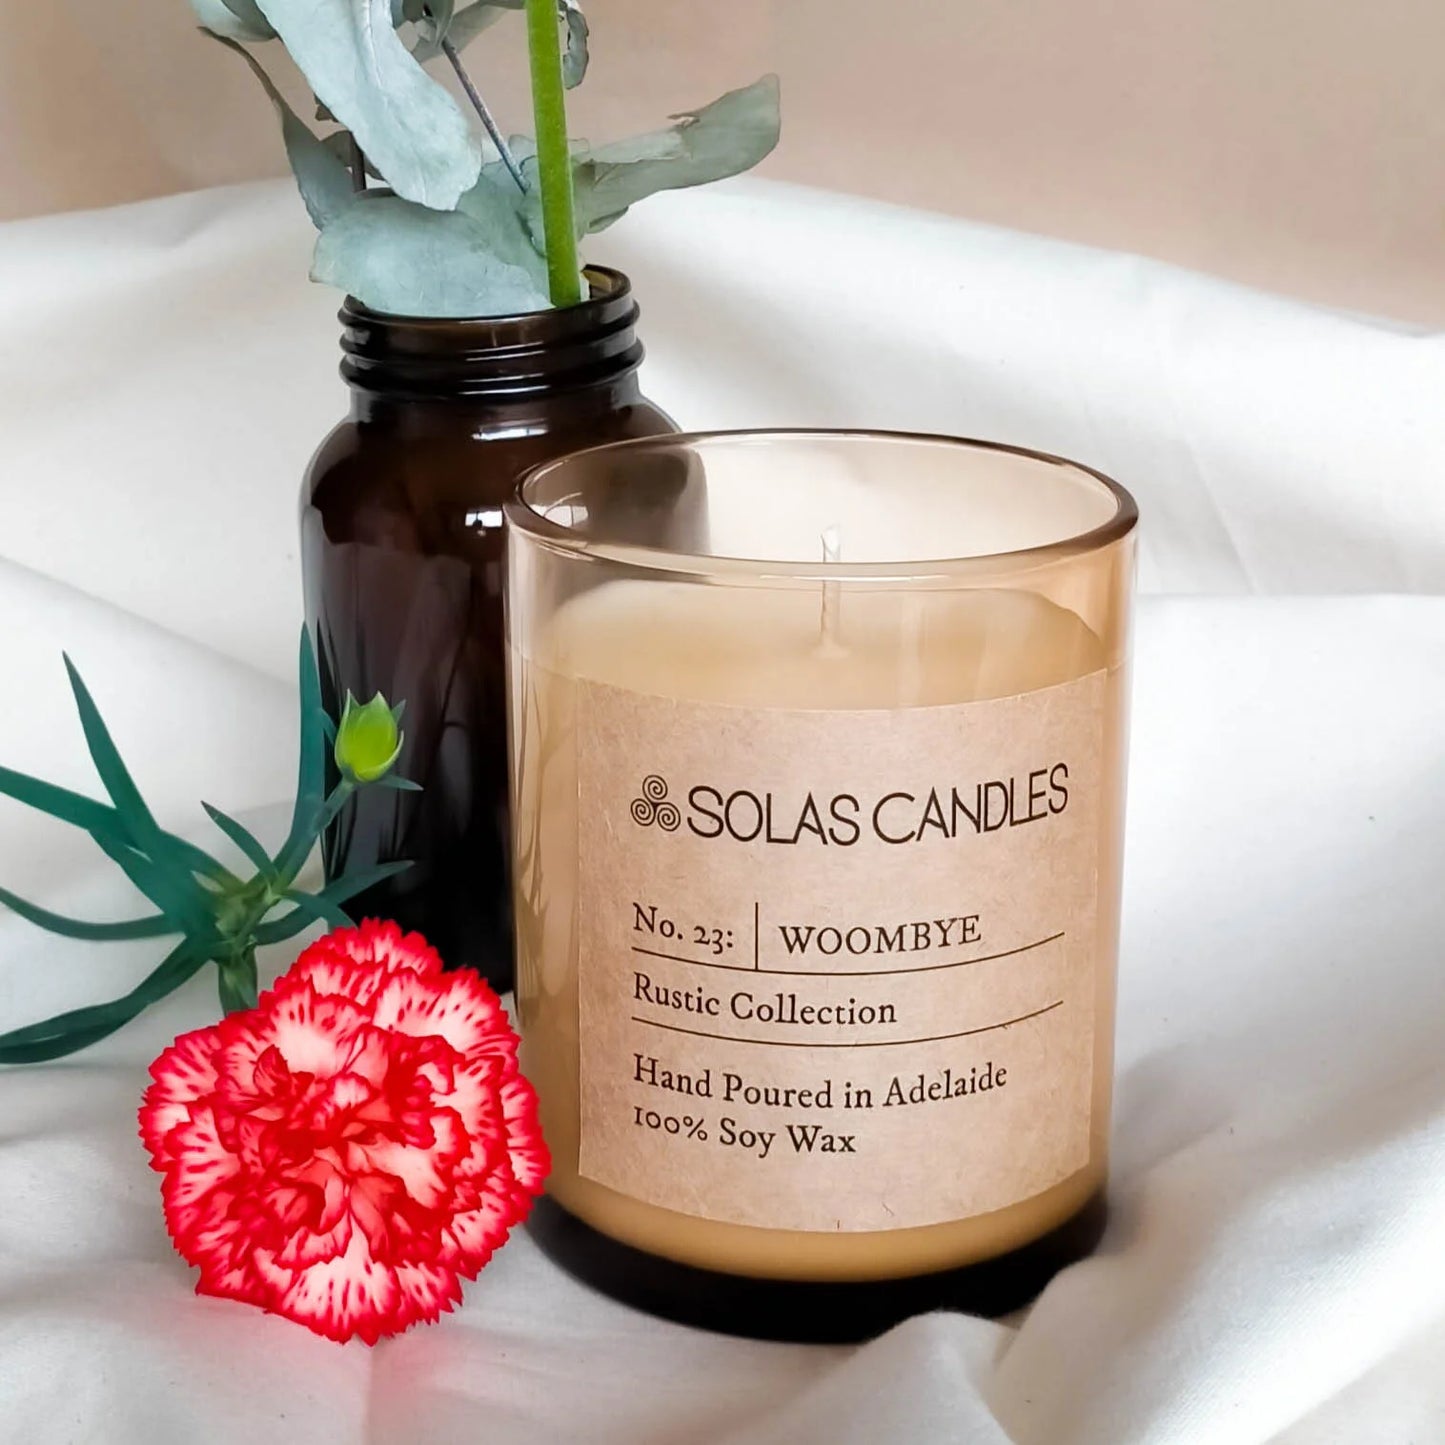 Solas Candles - Rustic Collection, No.23 Woomybe